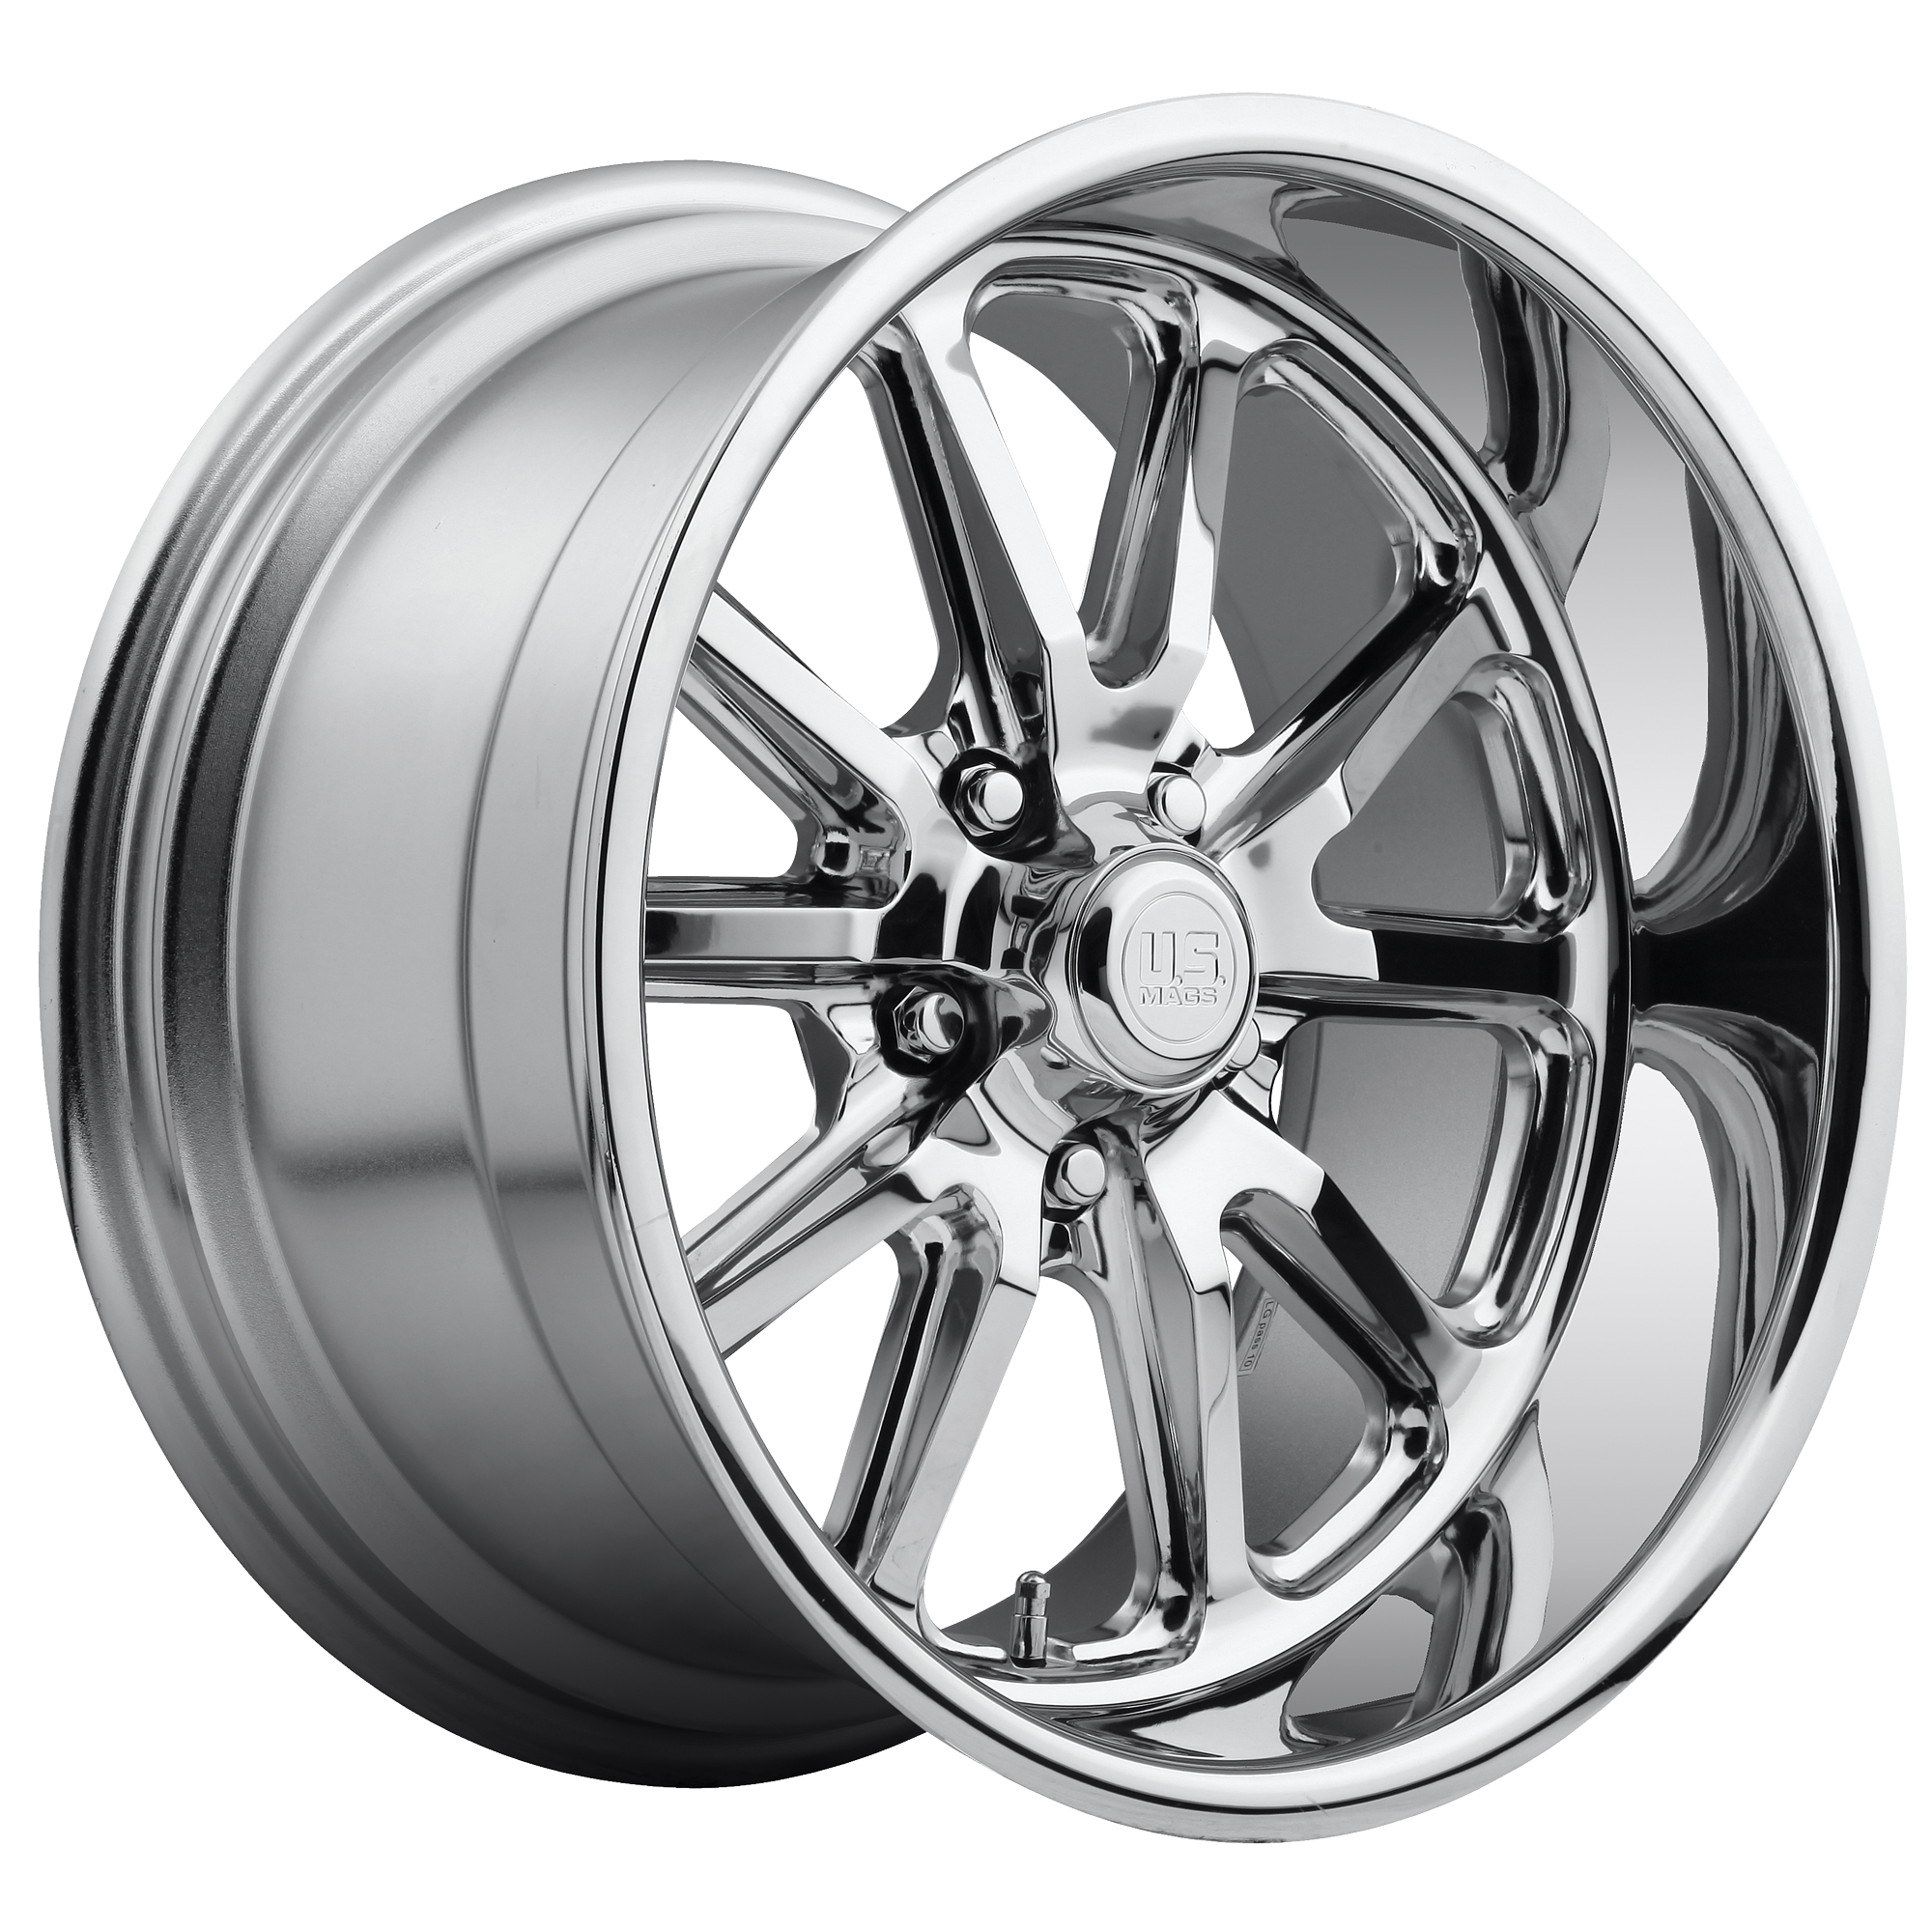 RAMBLER 18x8 5x114.30 CHROME PLATED (1 mm) - Tires and Engine Performance